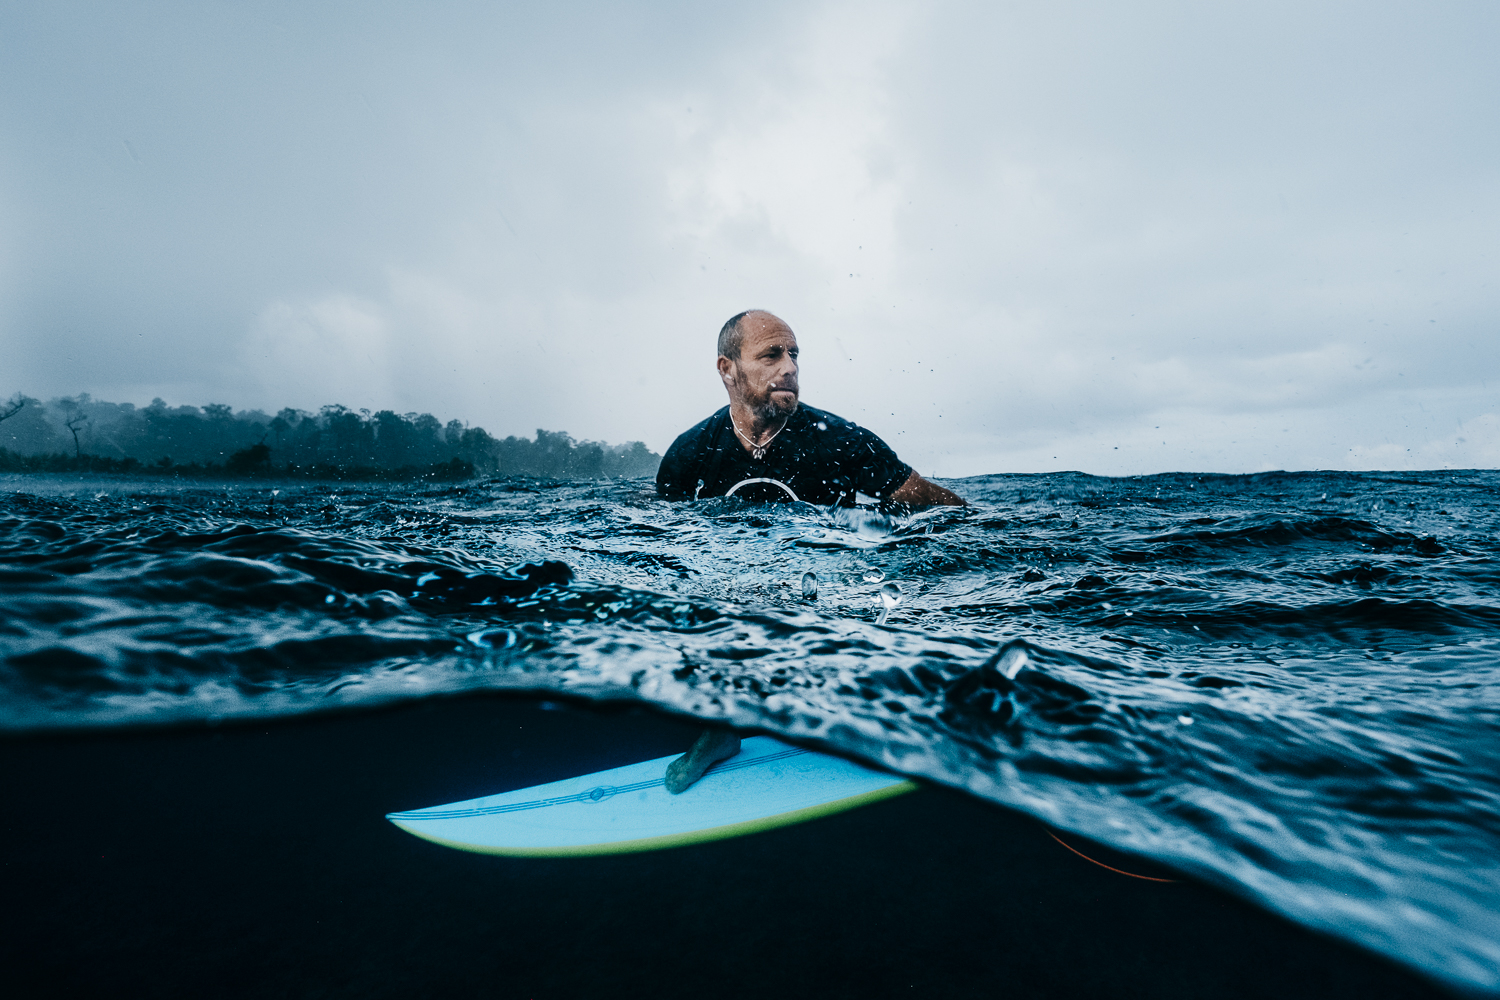 Interview with Russell Ord, Award-winning Ocean and Lifestyle photographer